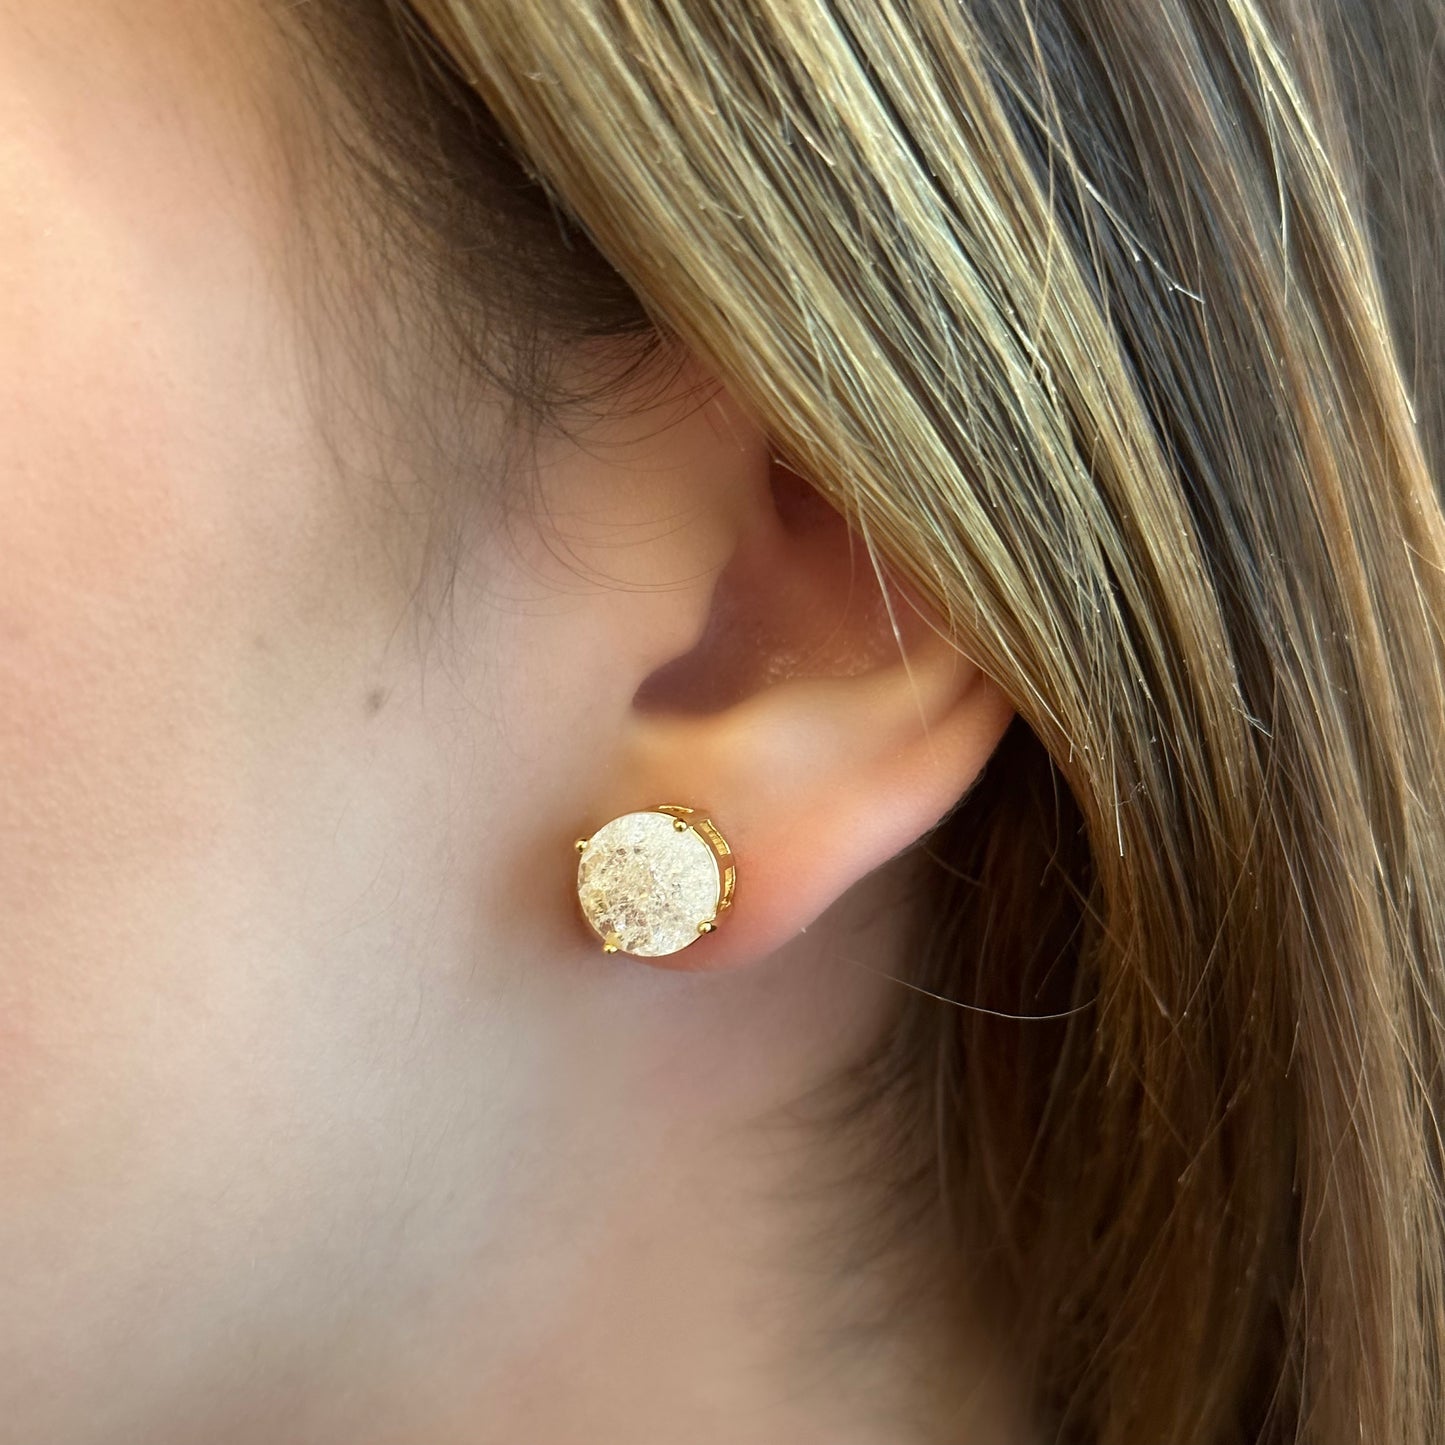 10MM CRACKED STUD EARRINGS | 18K Gold Plated